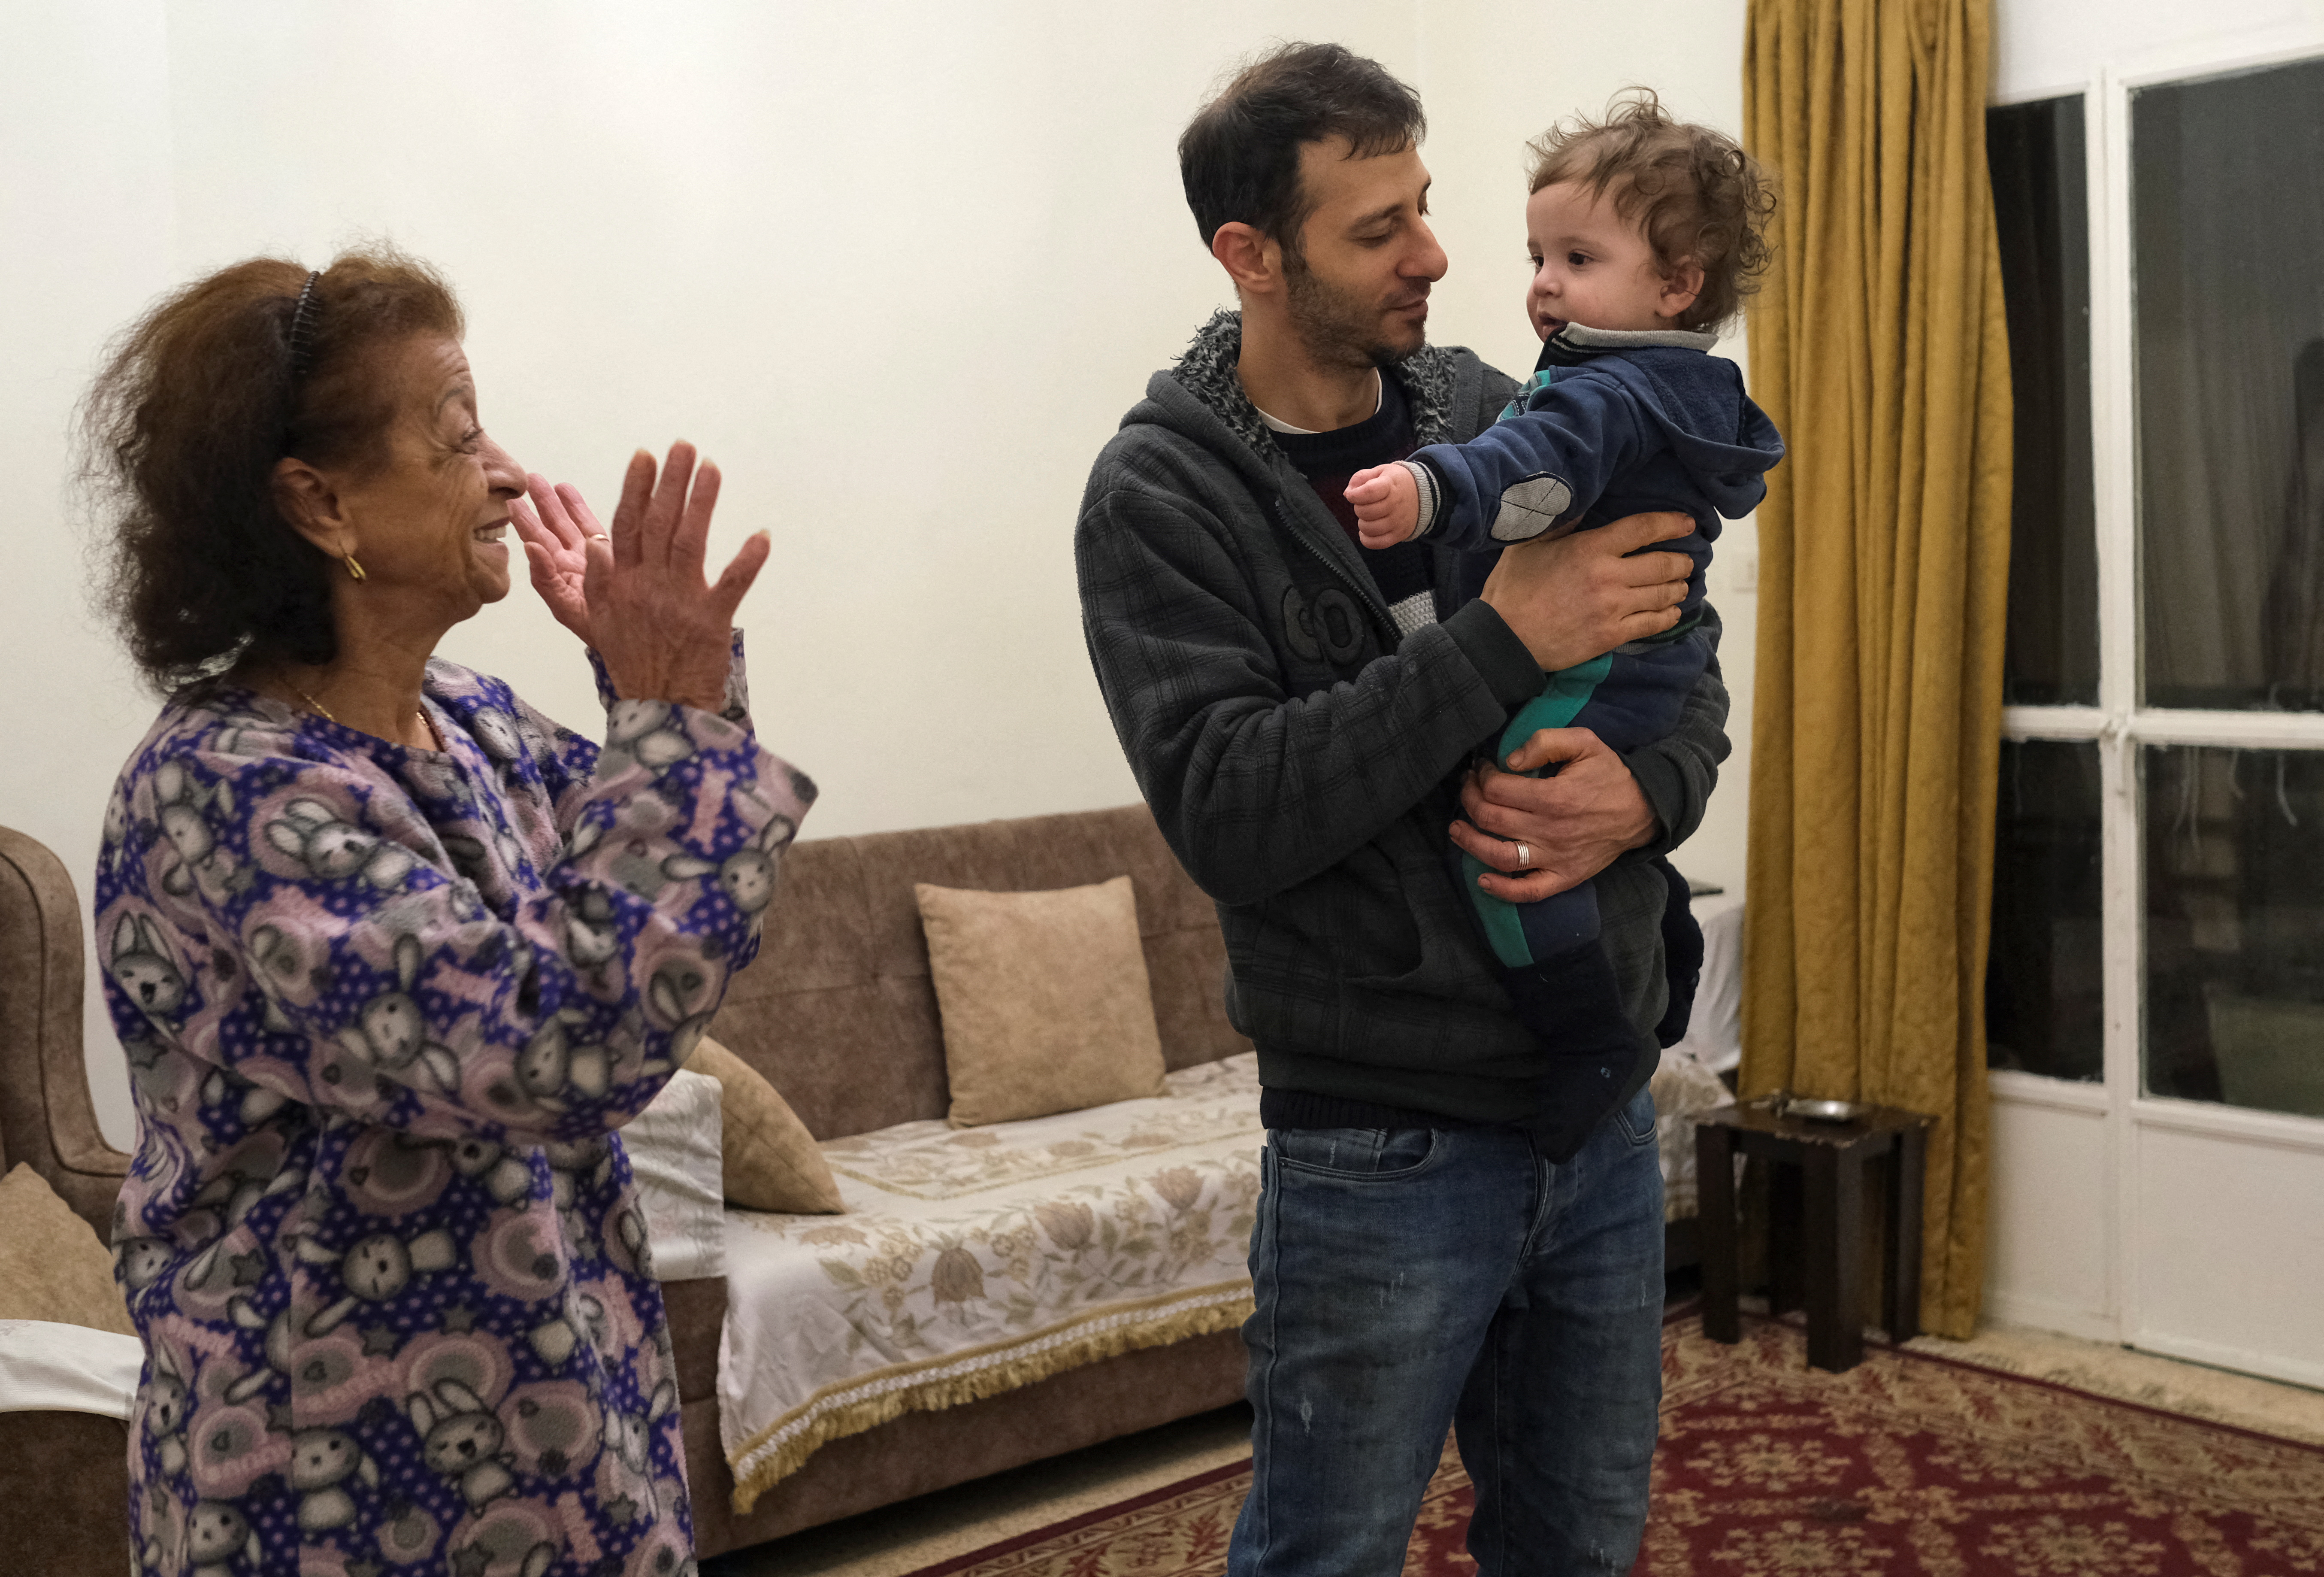 Shadi Ali Hamoud's mother gestures as she plays with her grandson at their house in Beirut